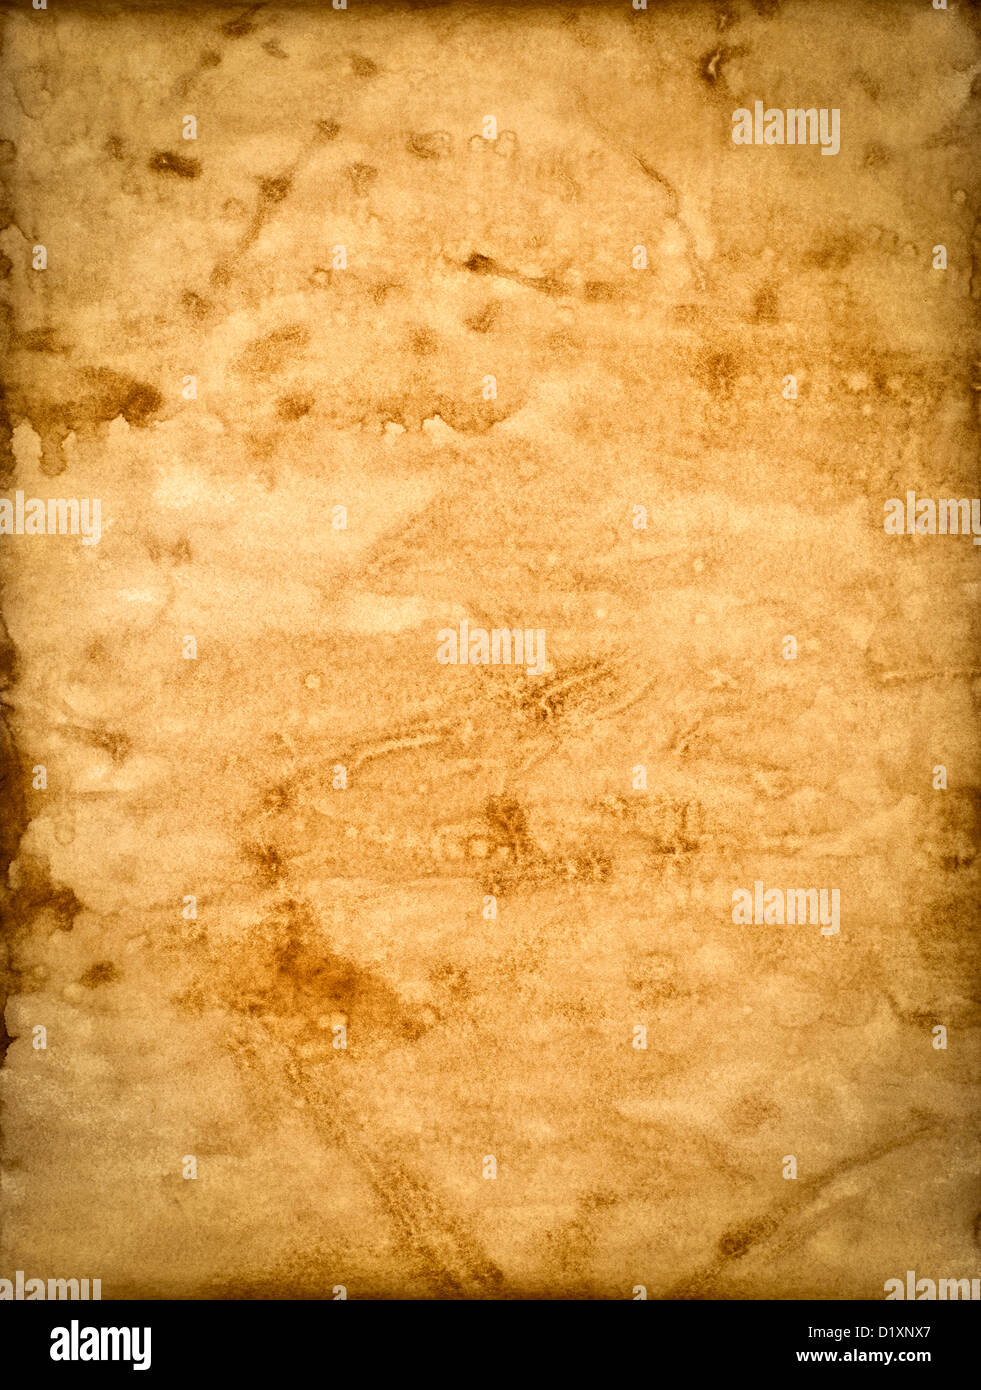 https://c8.alamy.com/comp/D1XNX7/grungy-old-paper-background-and-texture-D1XNX7.jpg